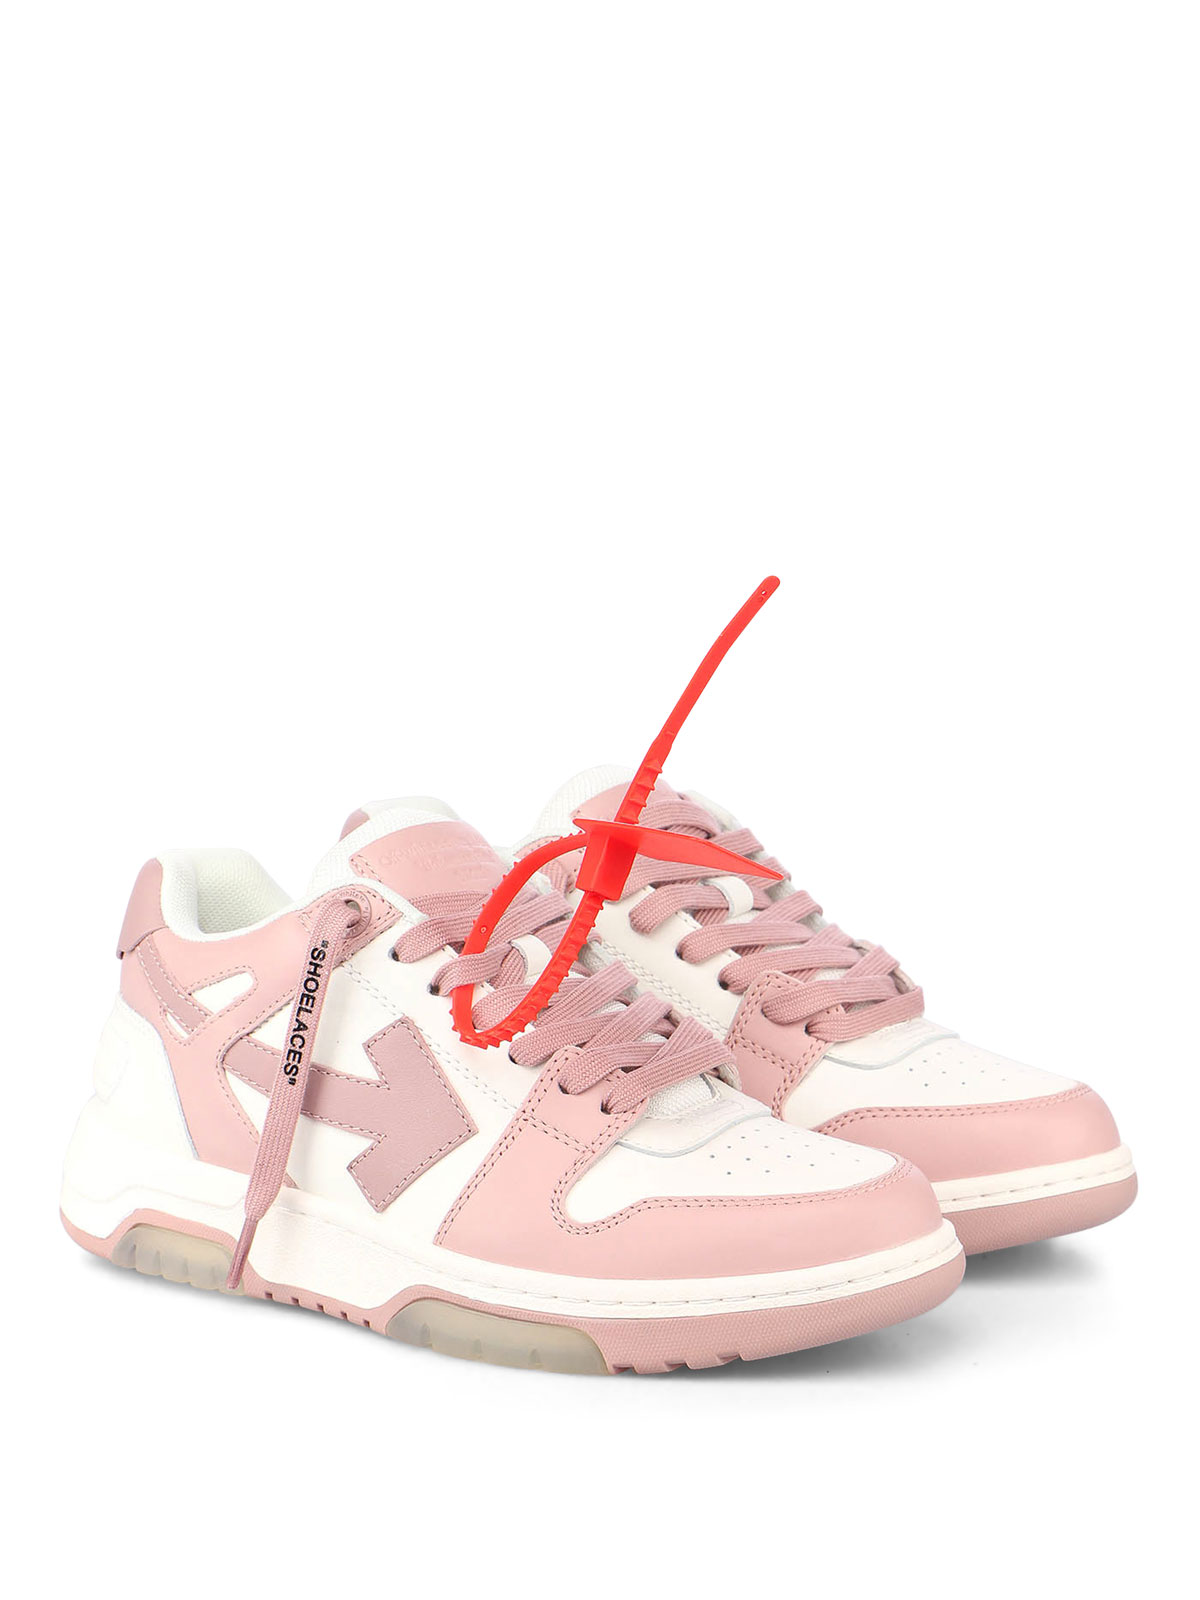 Off-White Out Of Office White And Pink Sneakers New